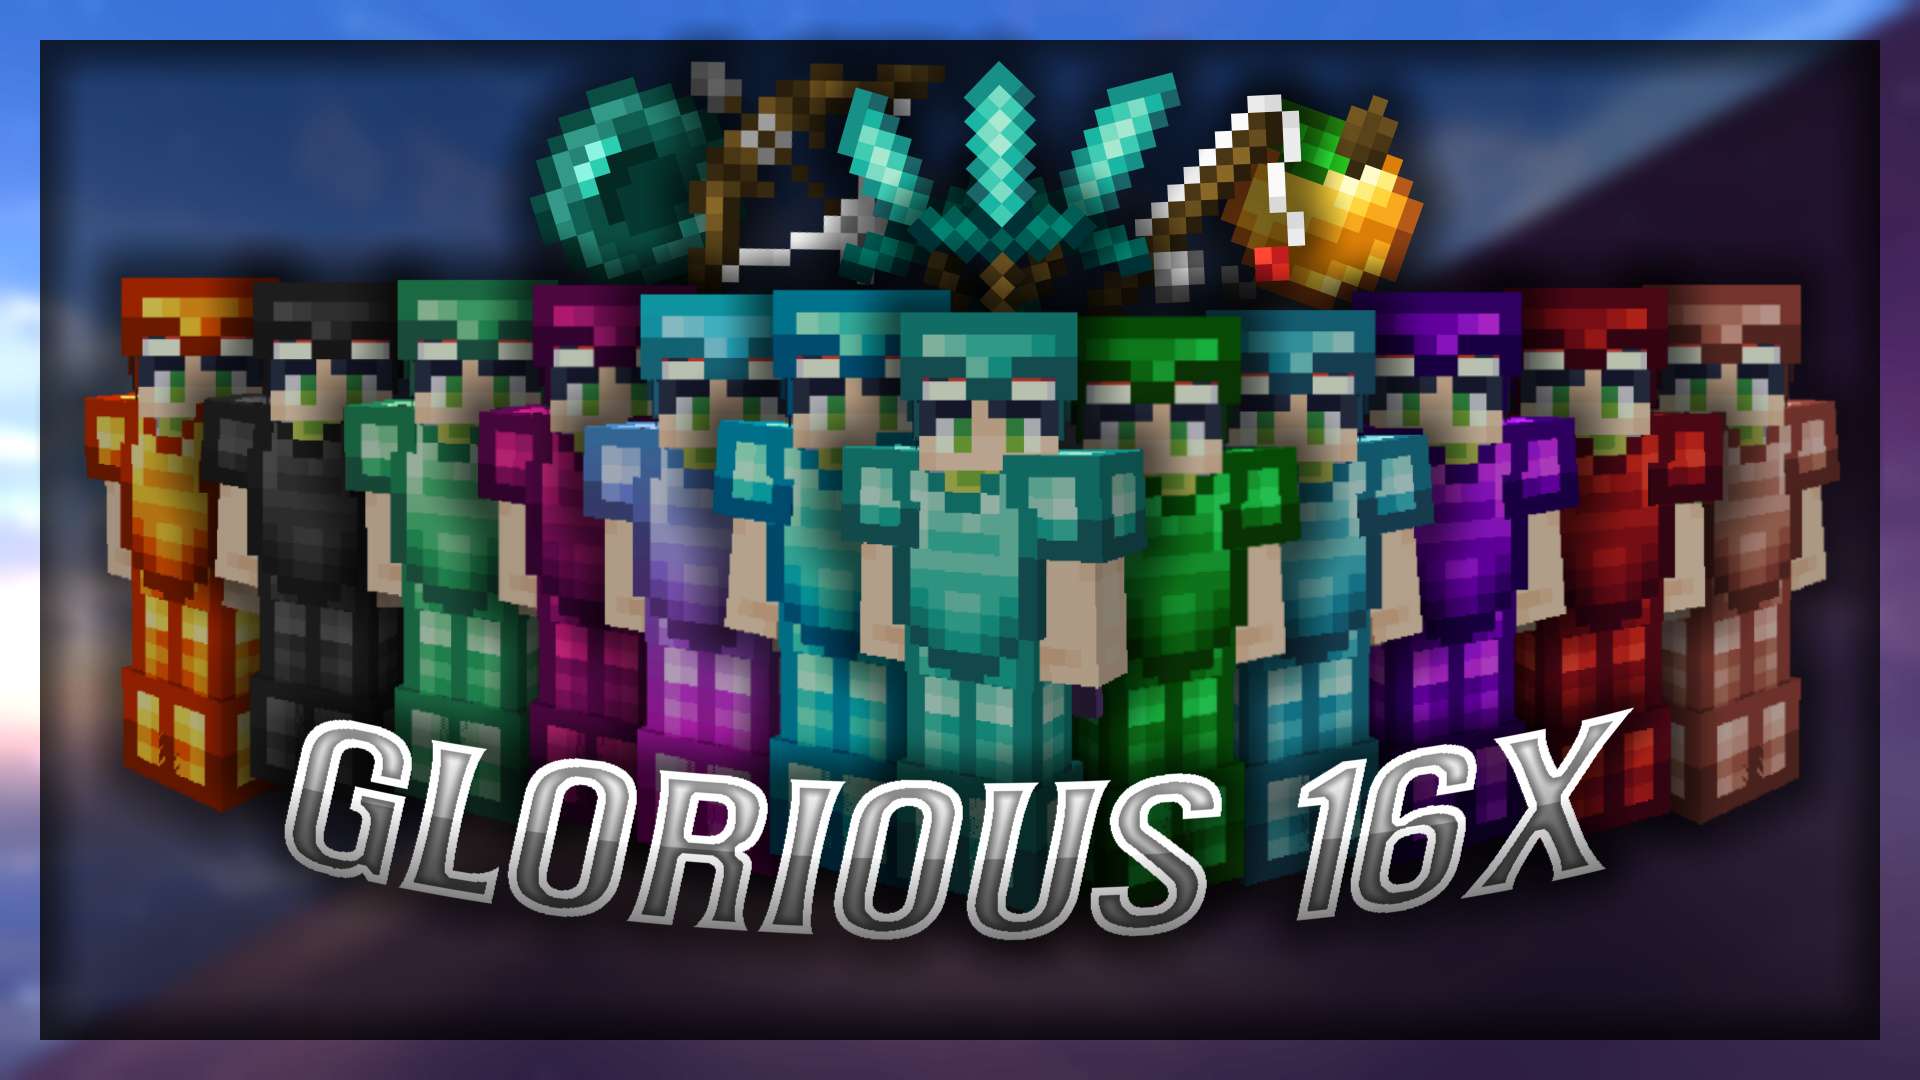 (open zip with WinRAR) Glorious - Purple 16x by Mek on PvPRP